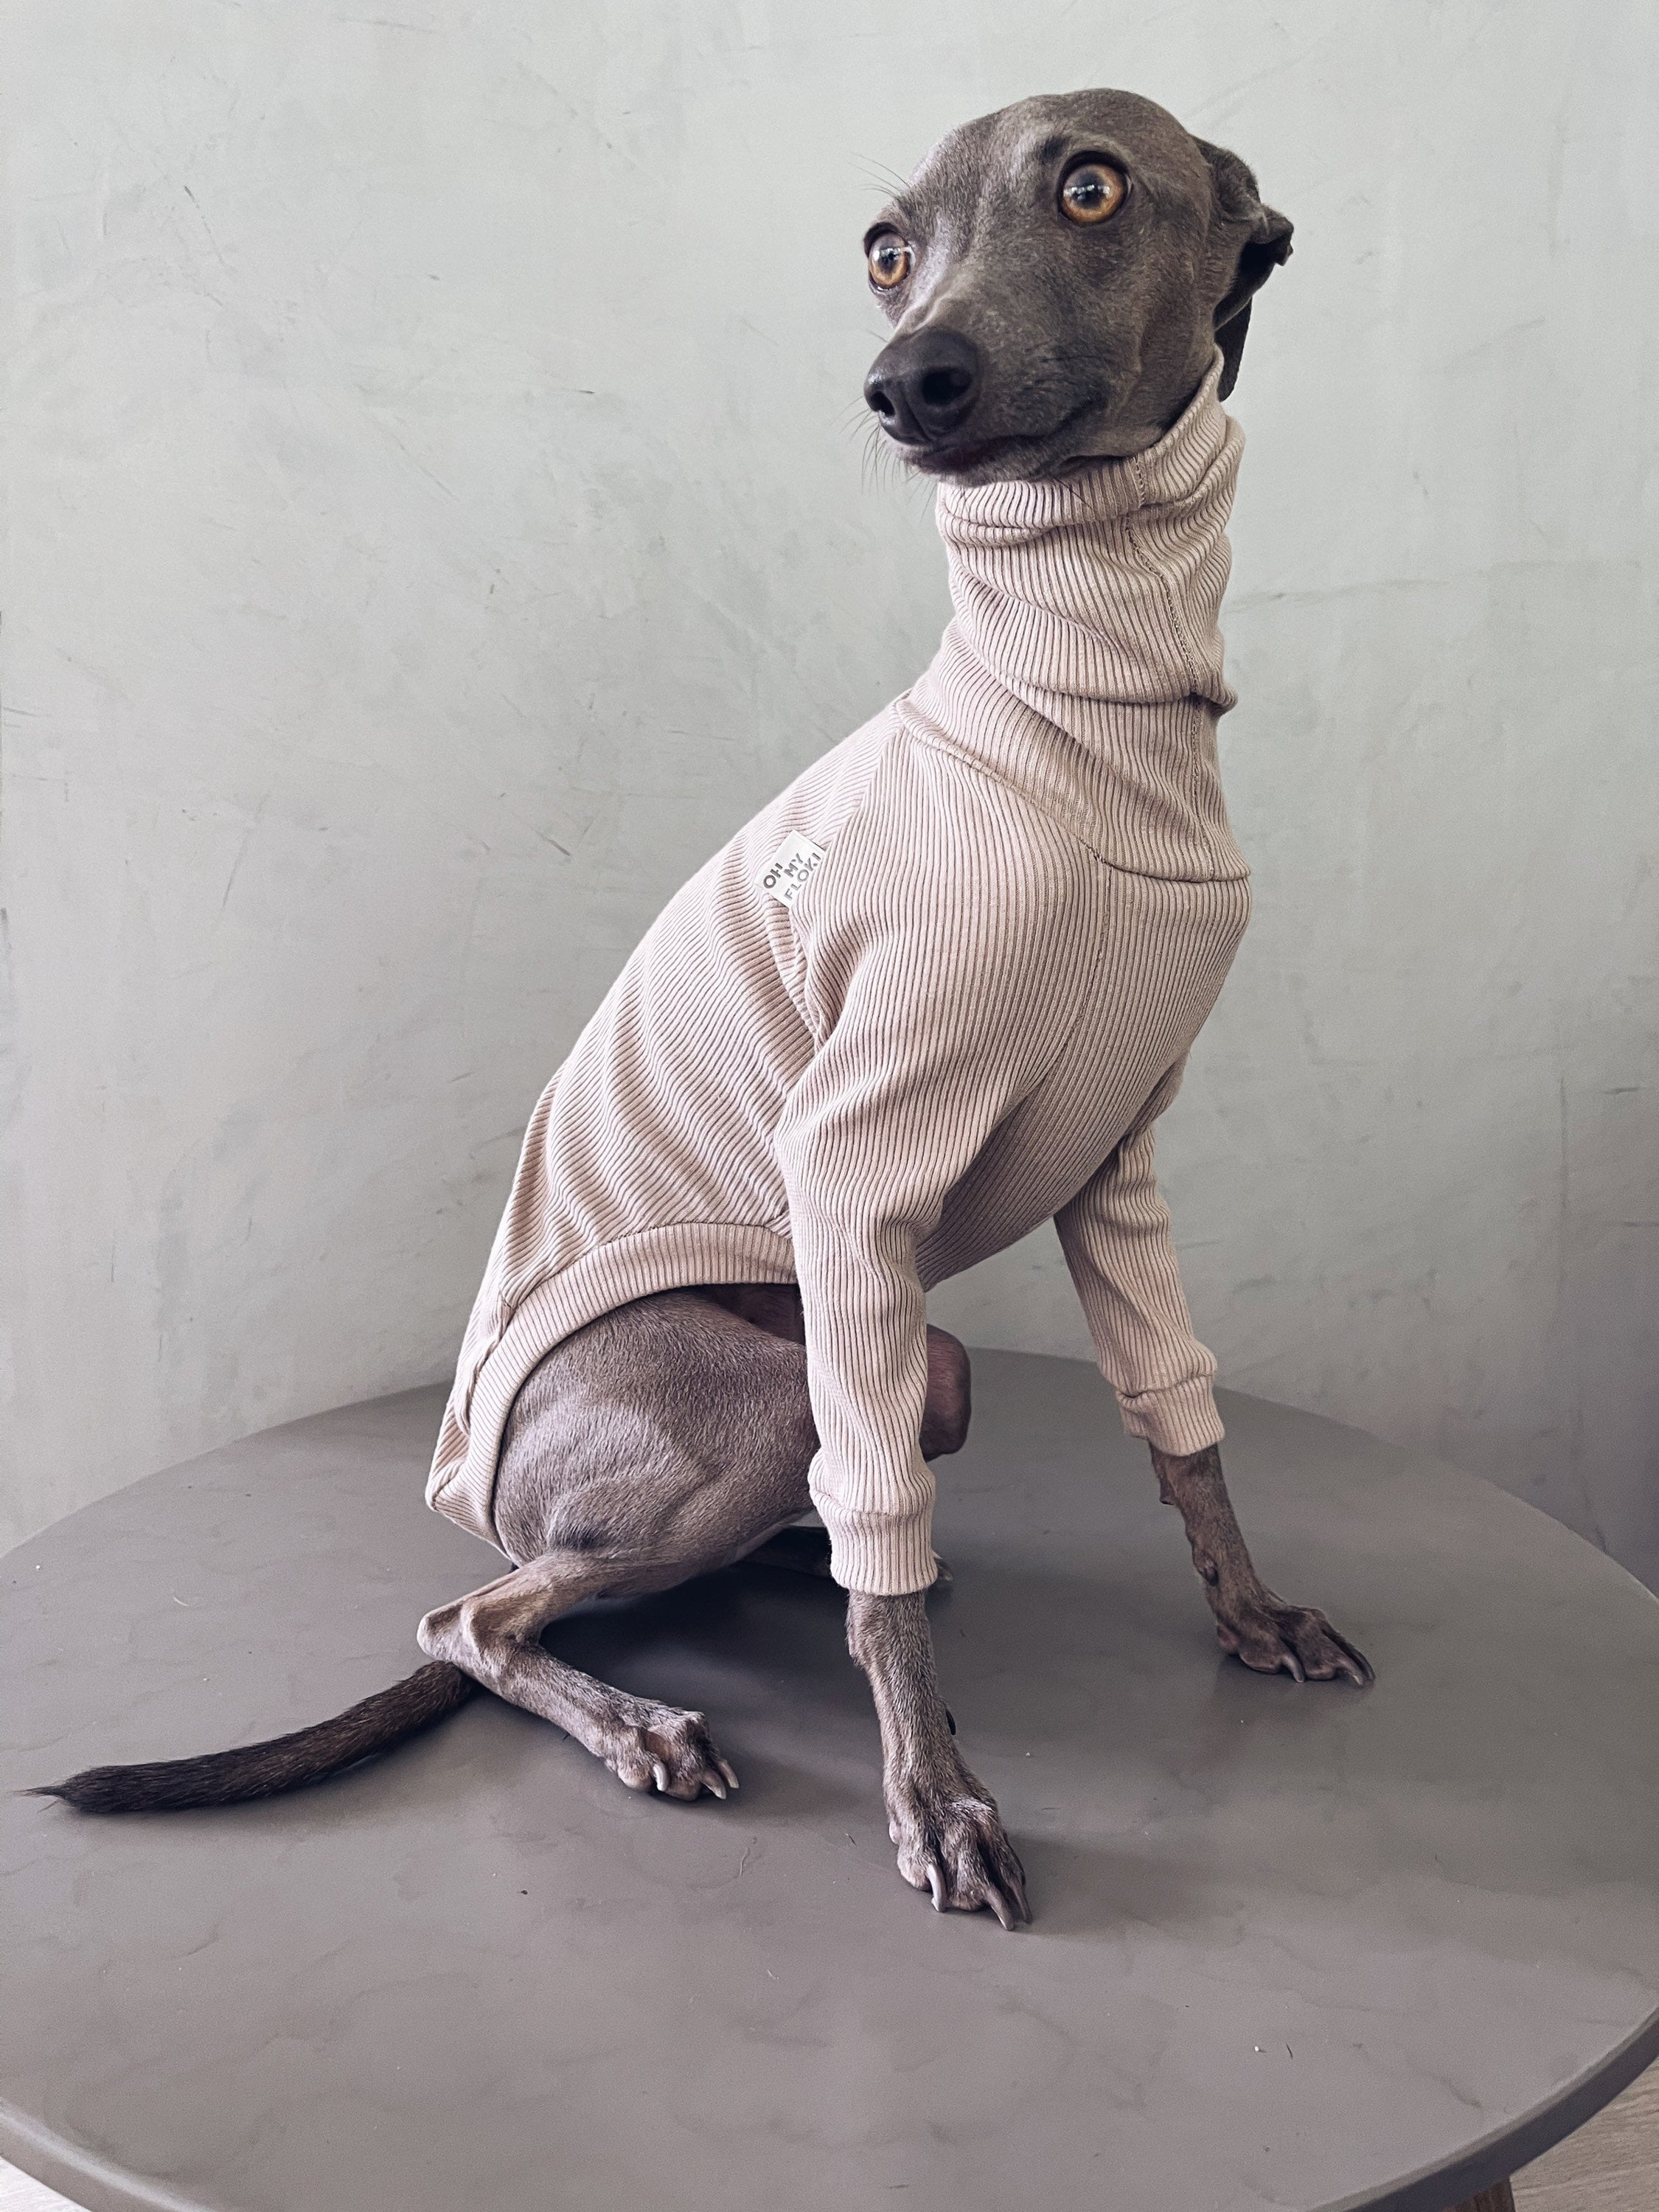 Greyhound and Whippet Clothes Clothes / Dog - Etsy